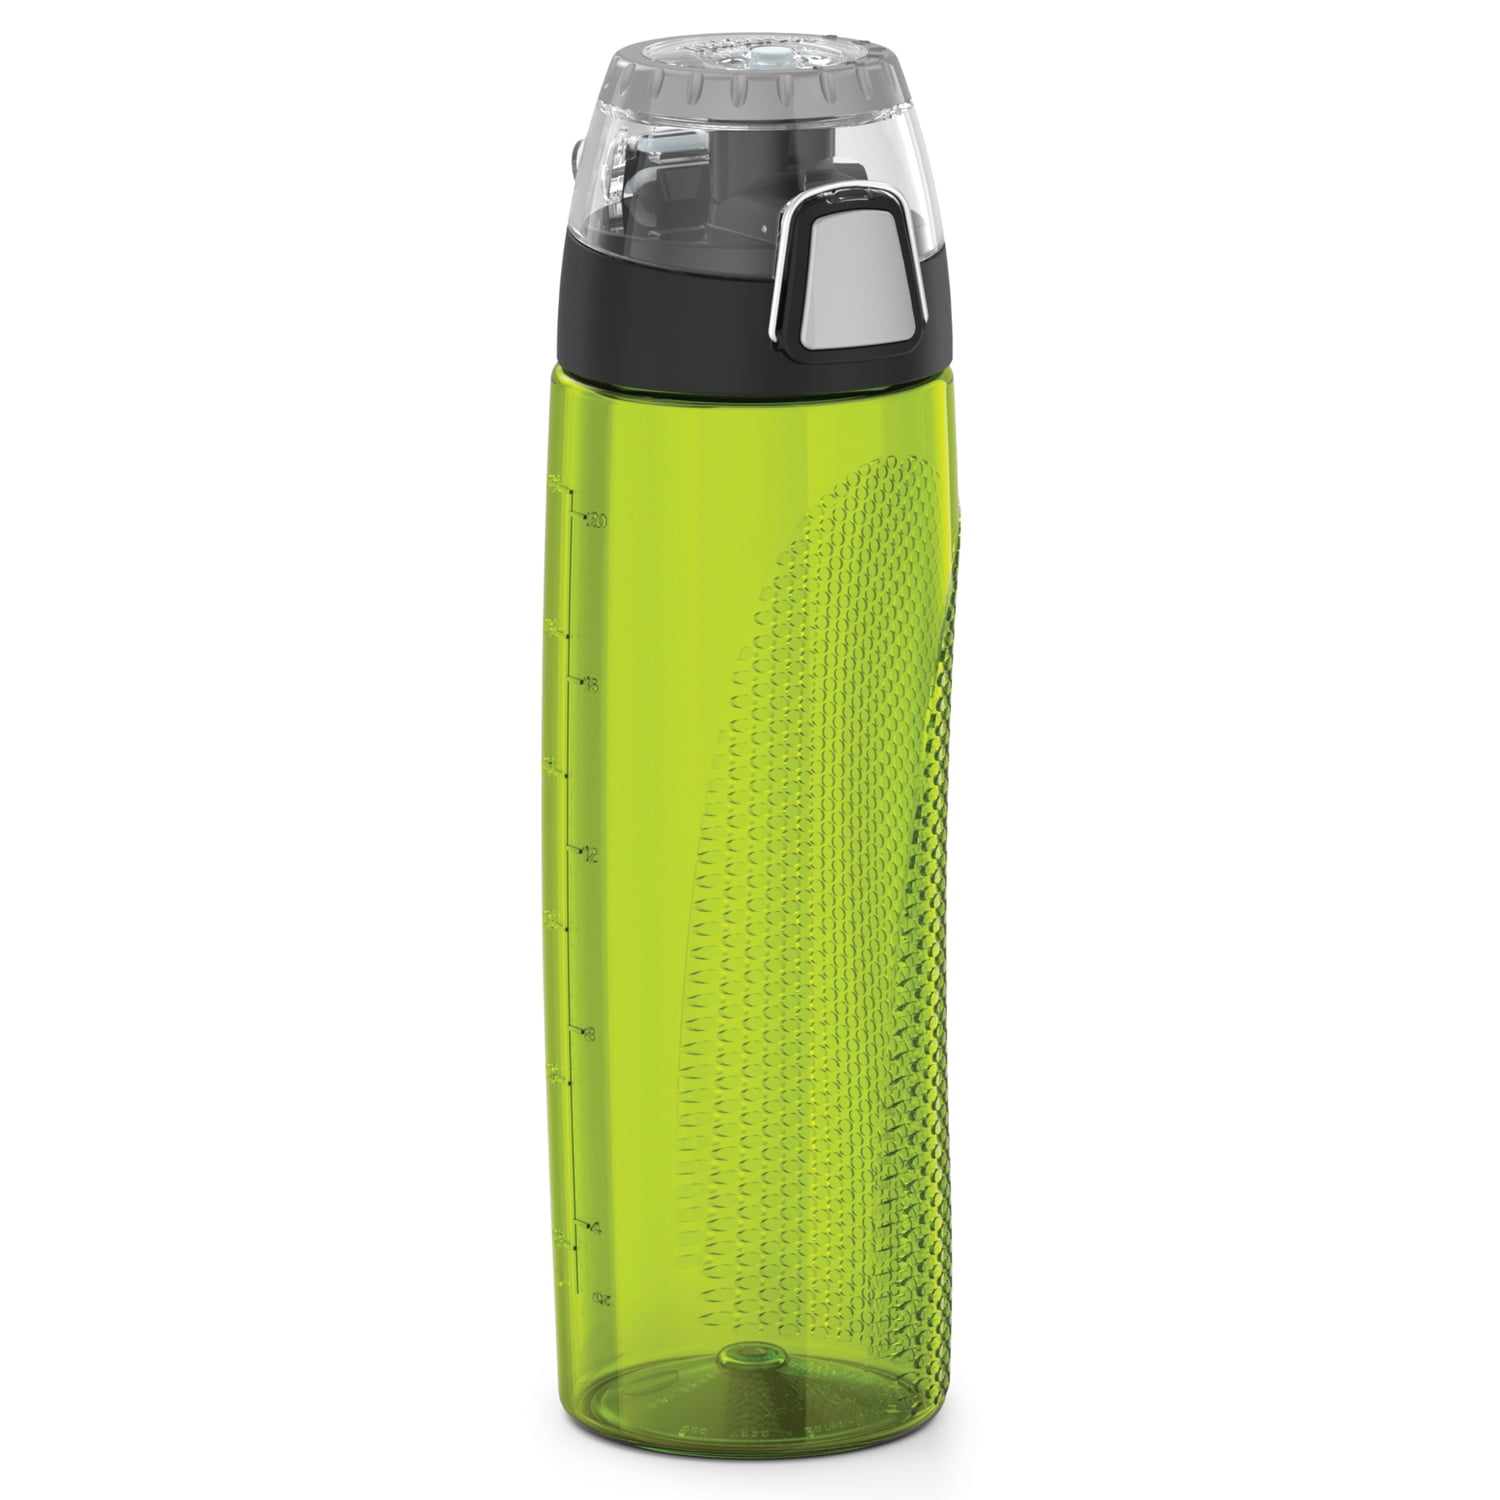 Thermos Hp4100cl6 24-Ounce Plastic Hydration Bottle with Meter (Clear)